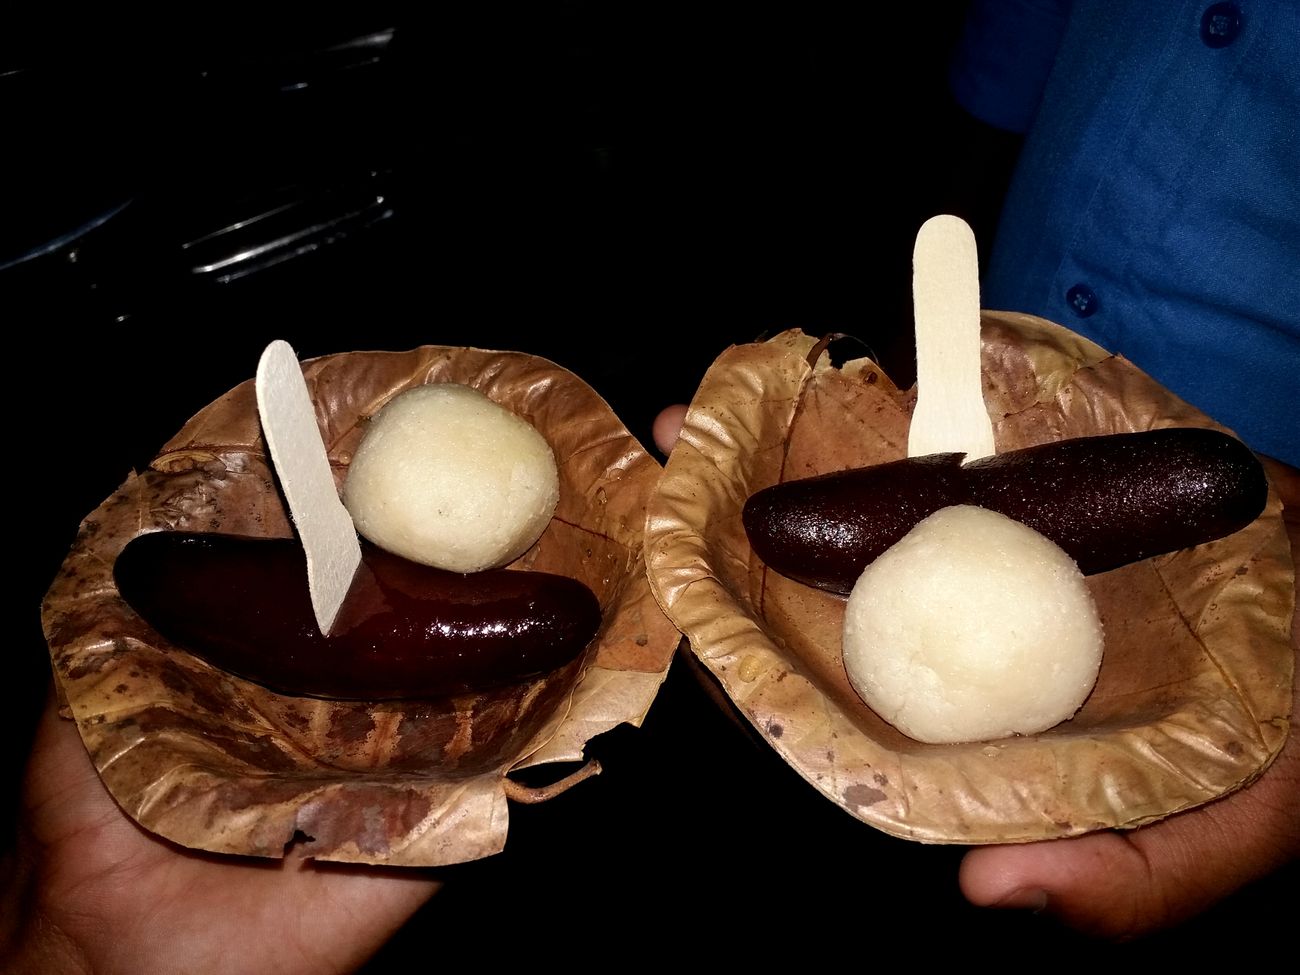 Kolkata’s specialty sweets, roshogula and gulab jamun, as served at sweet shops on the streets 